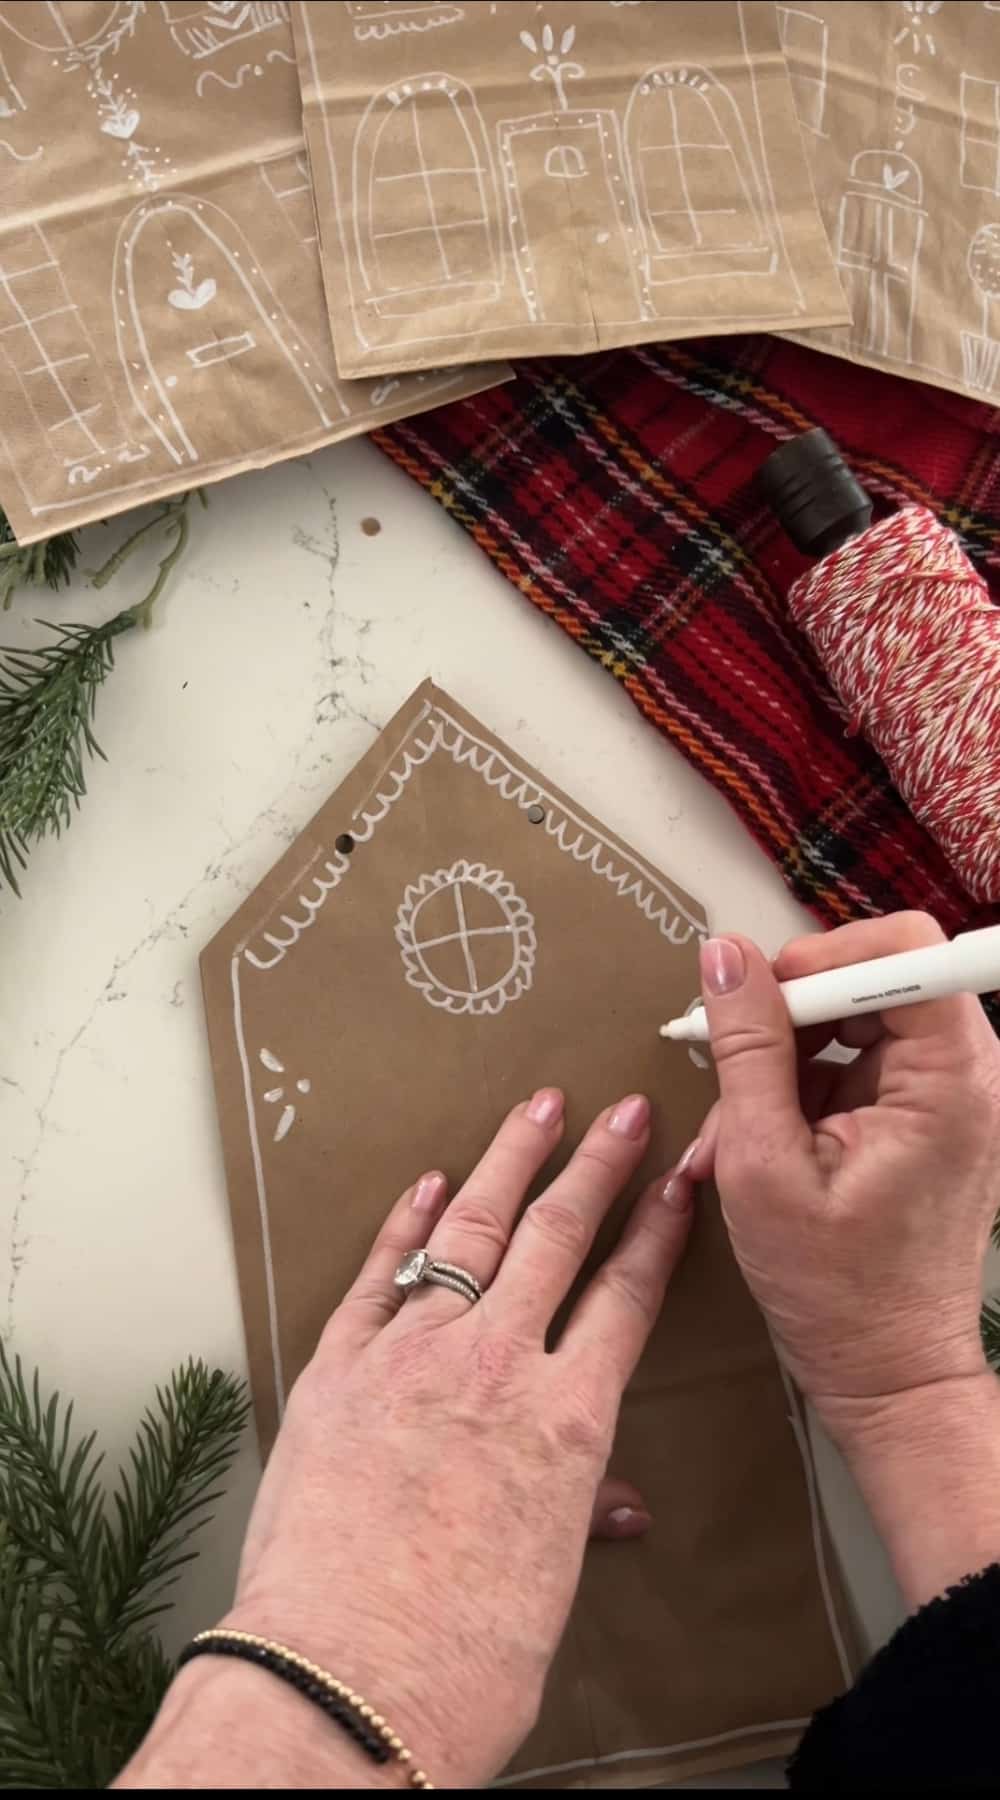 Make DIY Christmas Gingerbread Gift Bags. Transform plain paper bags into festive gingerbread house gift bags which are adorable under the tree or Christmas gatherings.